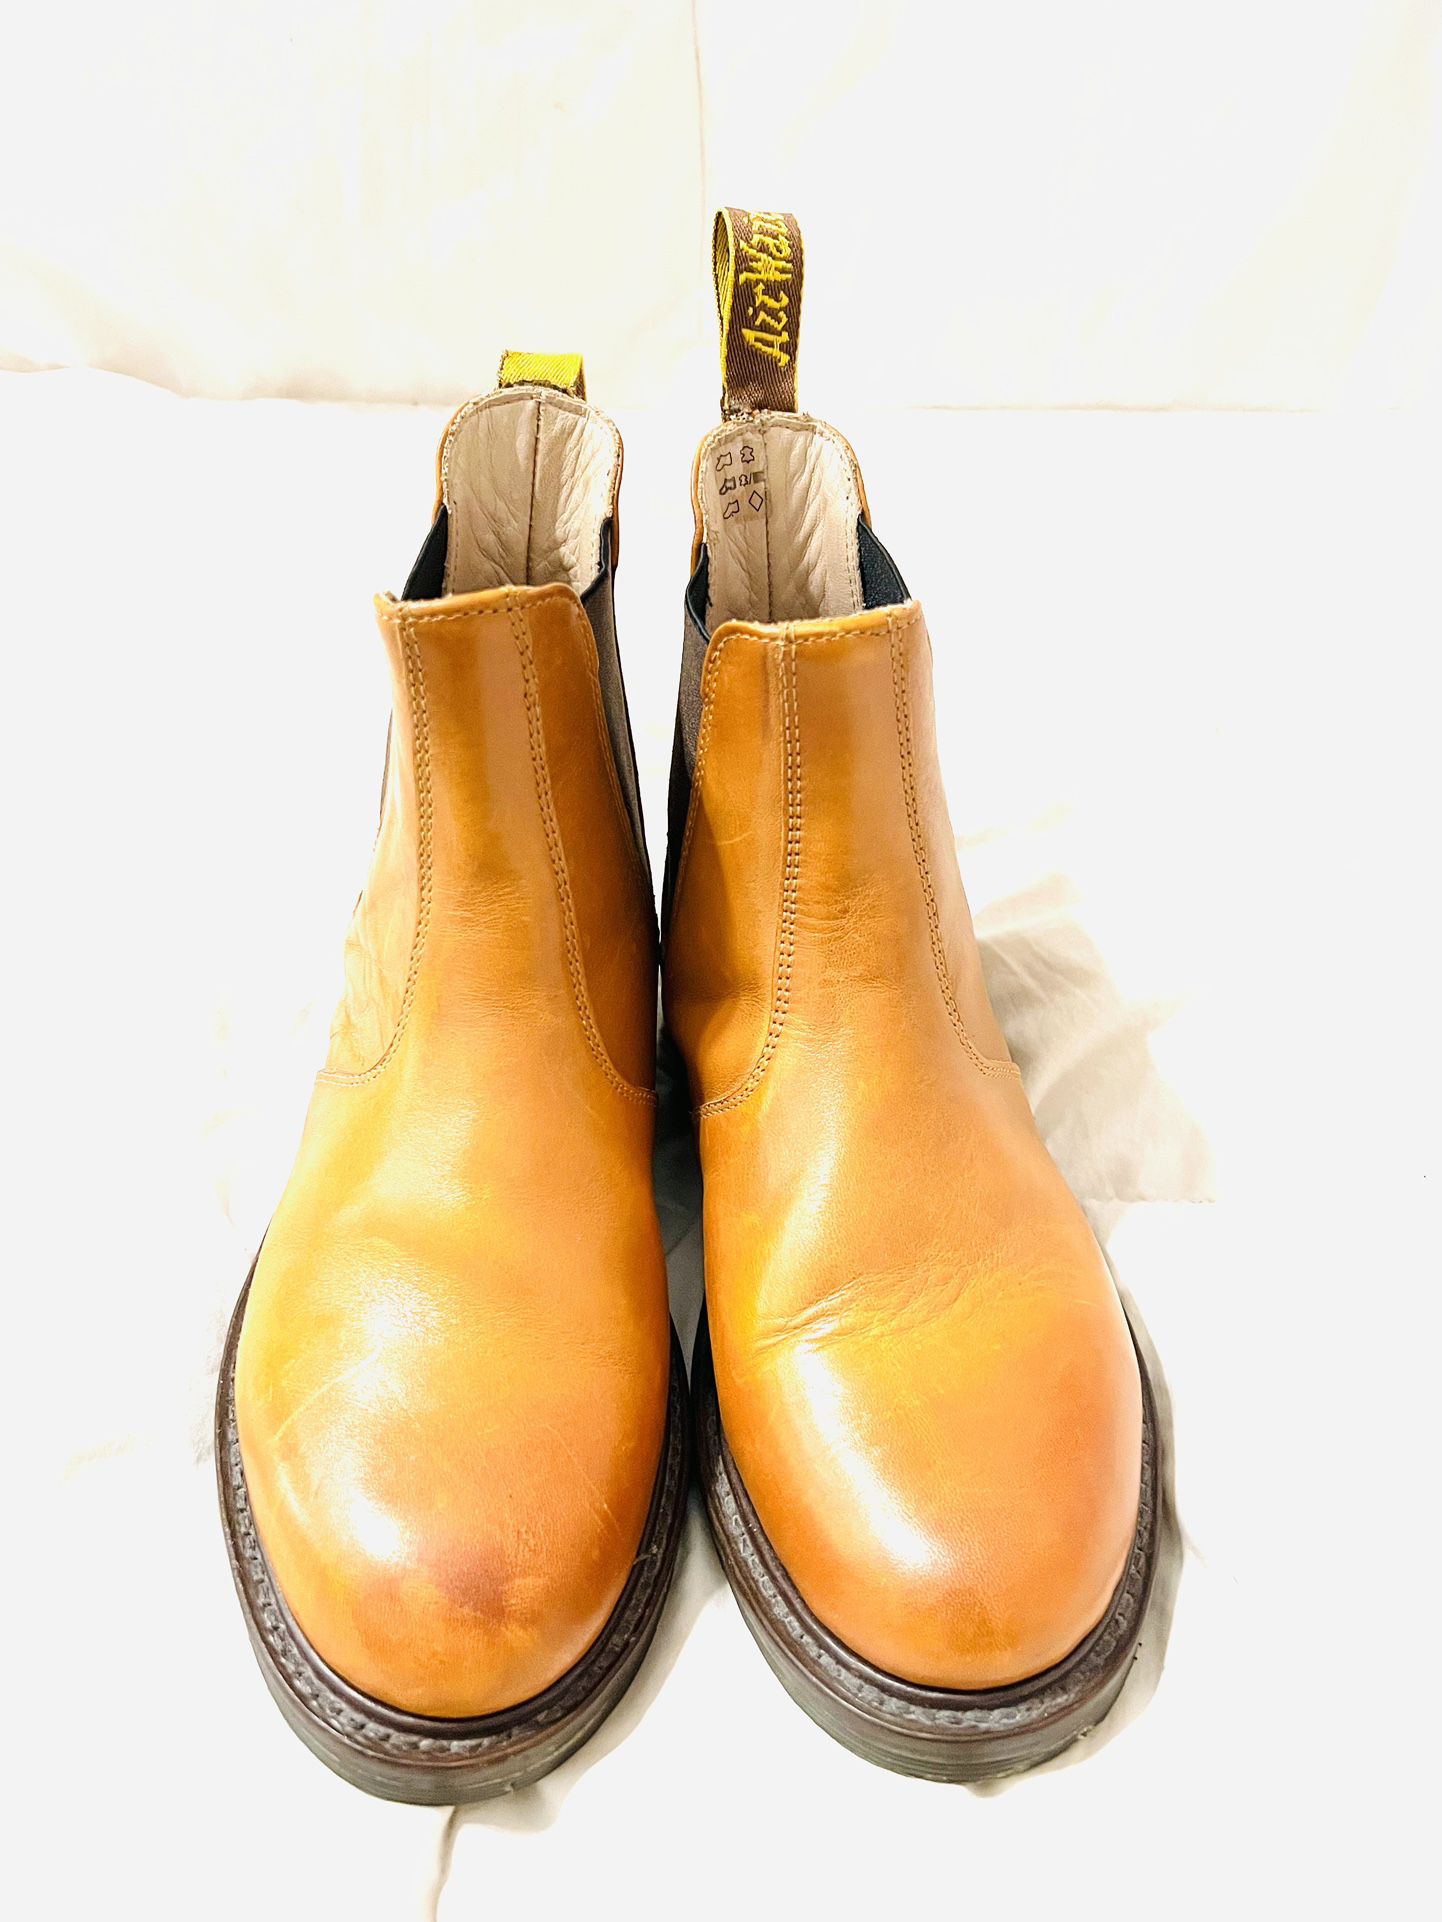 Dr. Laura Chelsea Tan Leather Size 5US/3UK/36EU for Sale in Arlington, TX - OfferUp